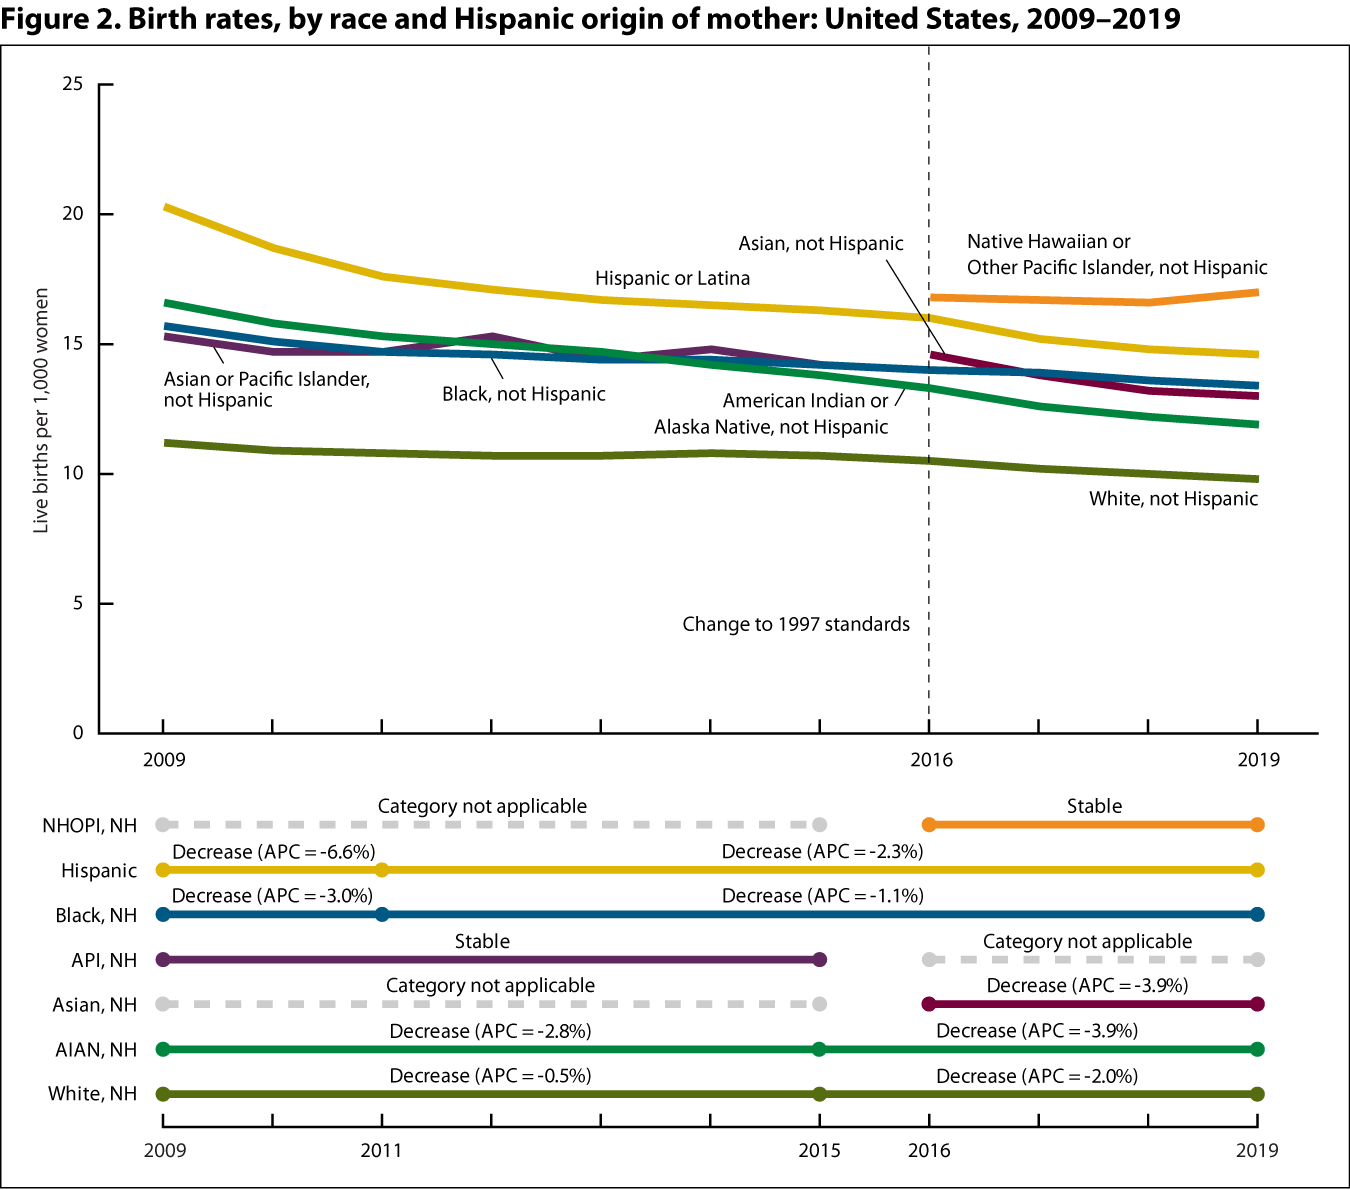 Figure 2 is a line graph showing birth rates (live births per 1,000 women) by race and Hispanic origin of mother for 2009 through 2019.